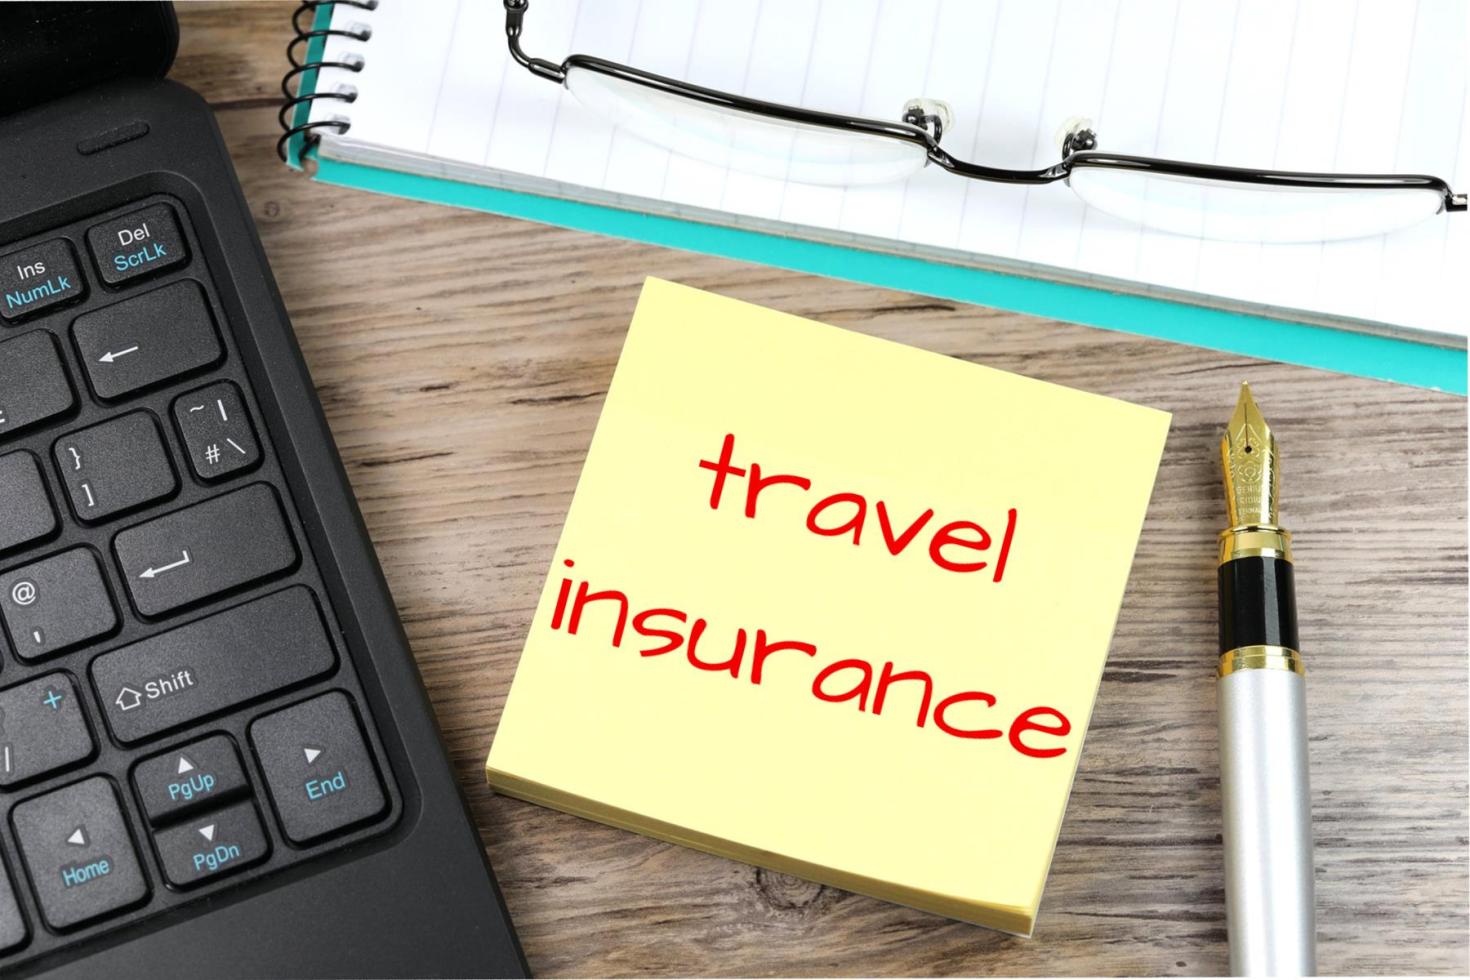 What Are the Exclusions and Limitations of Vehicle Insurance?